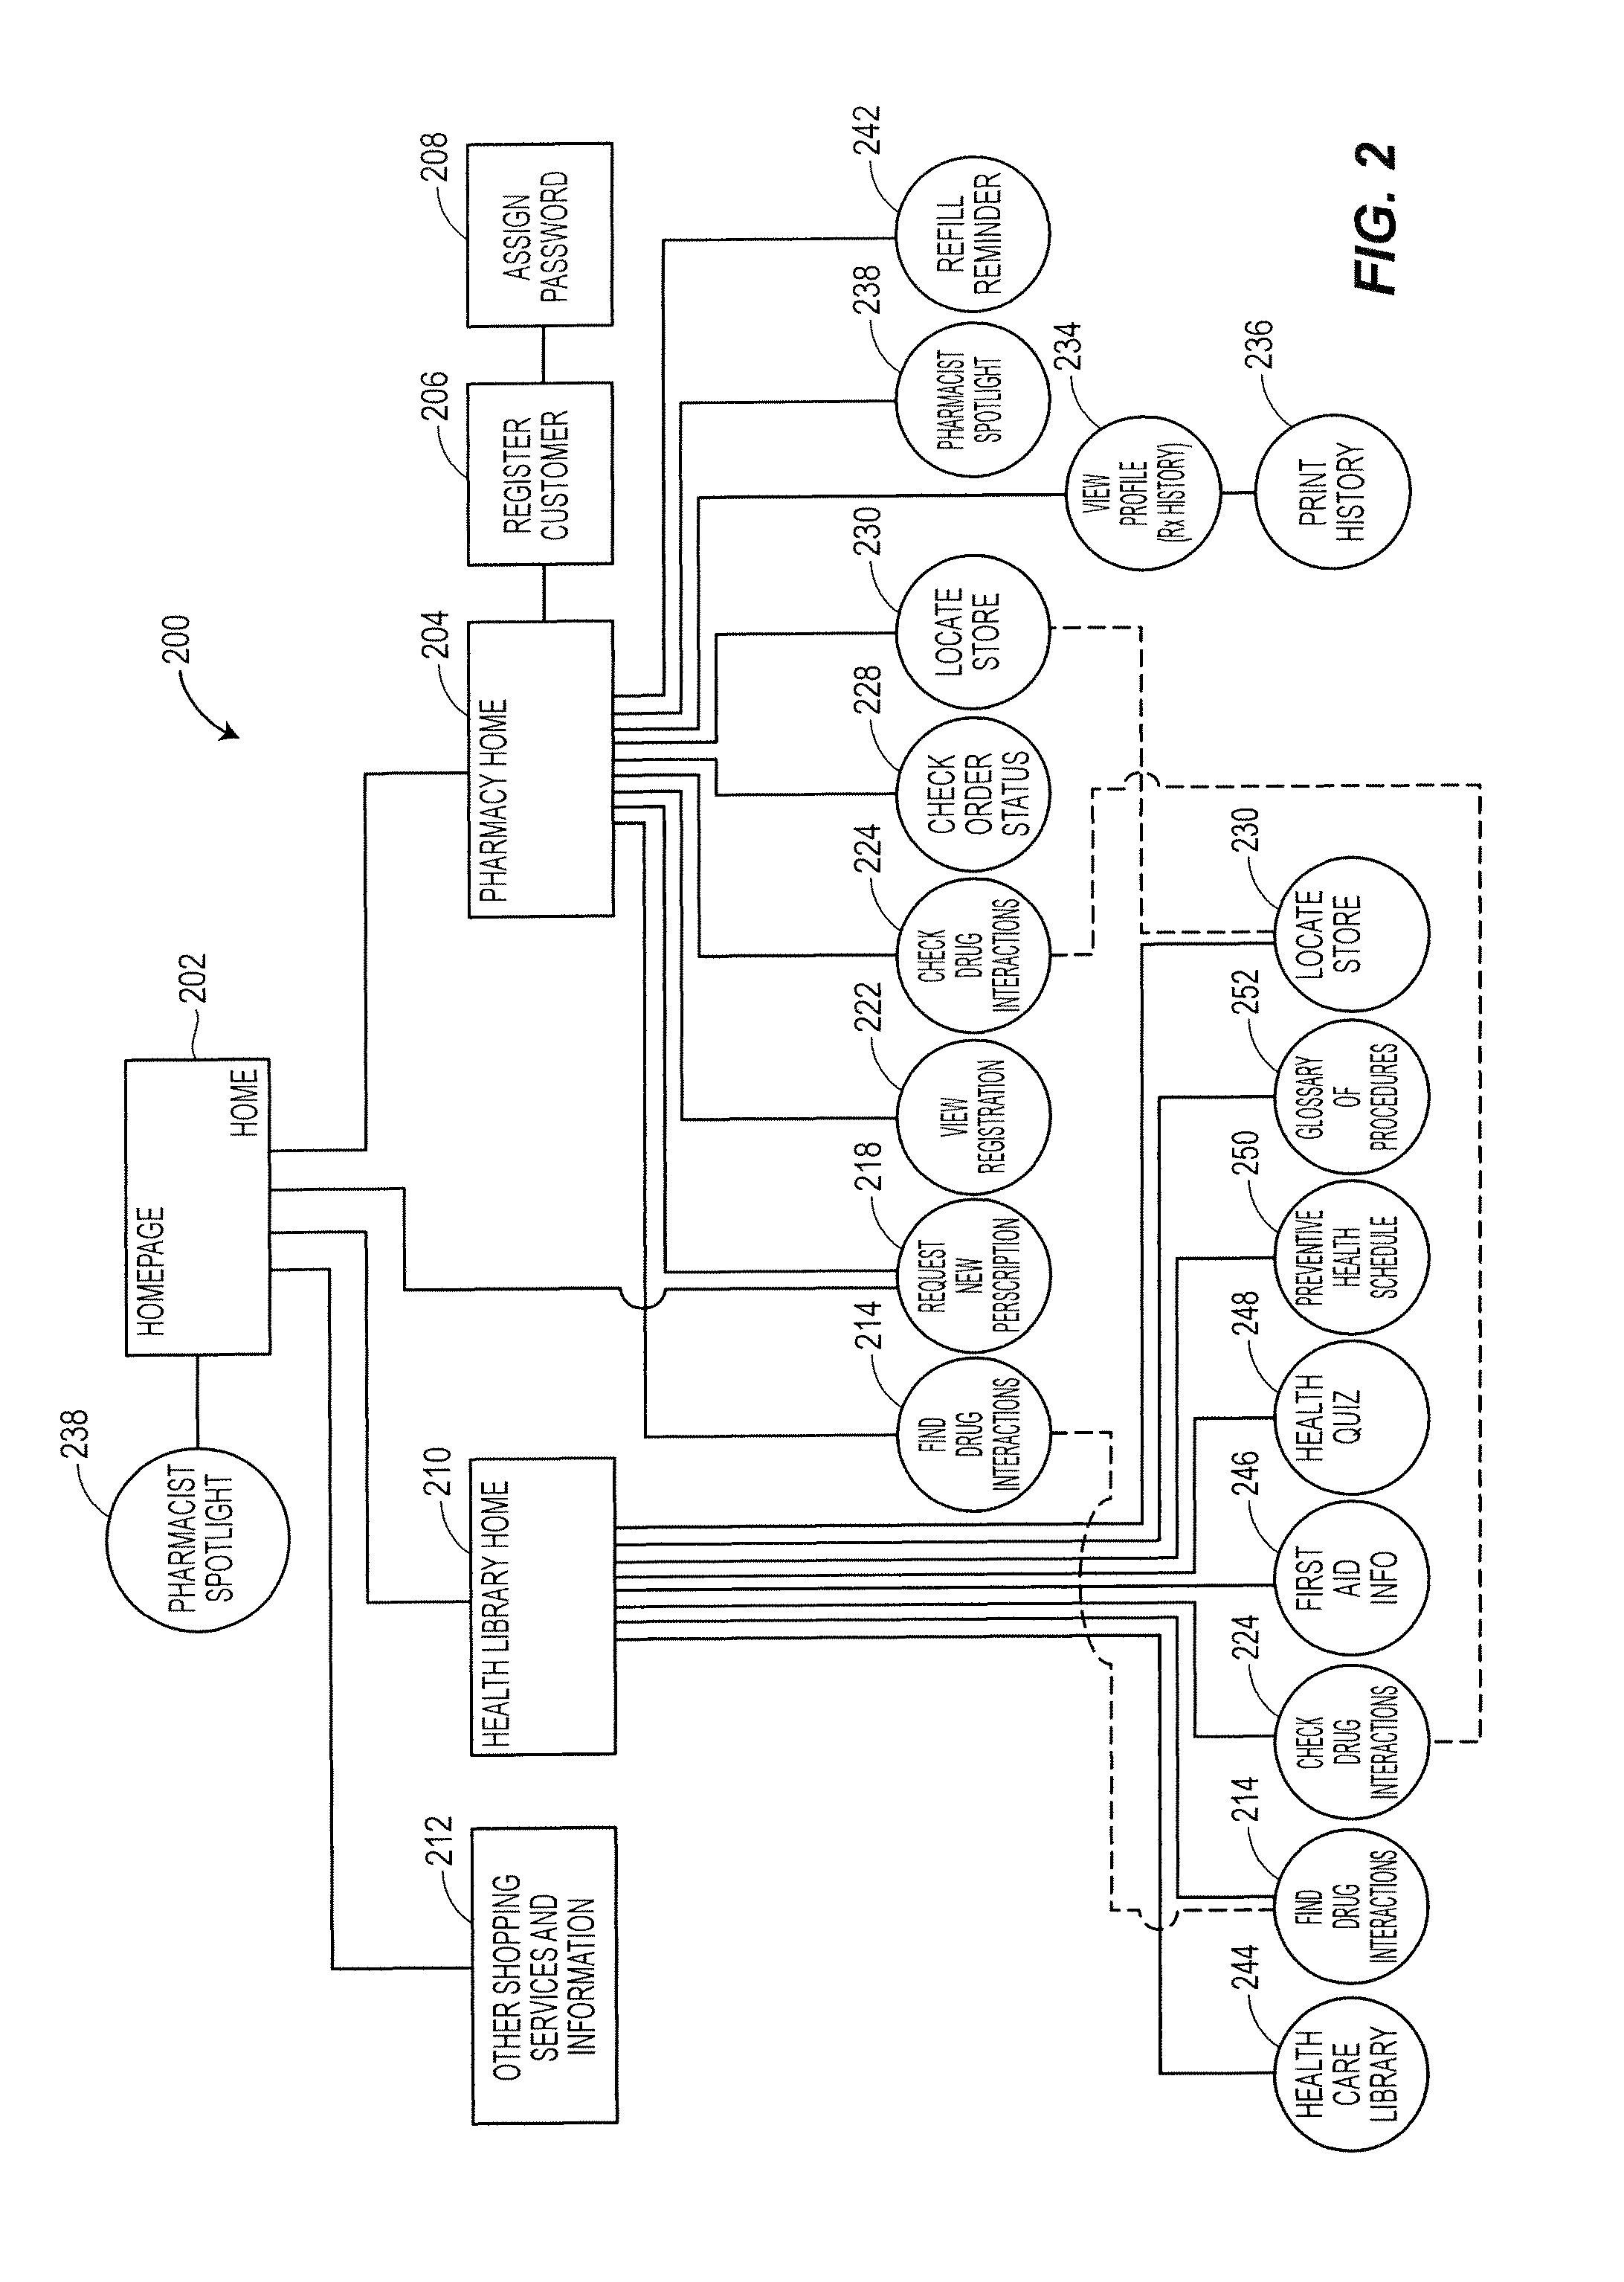 Apparatus and method for accessing pharmacy information and ordering prescriptions